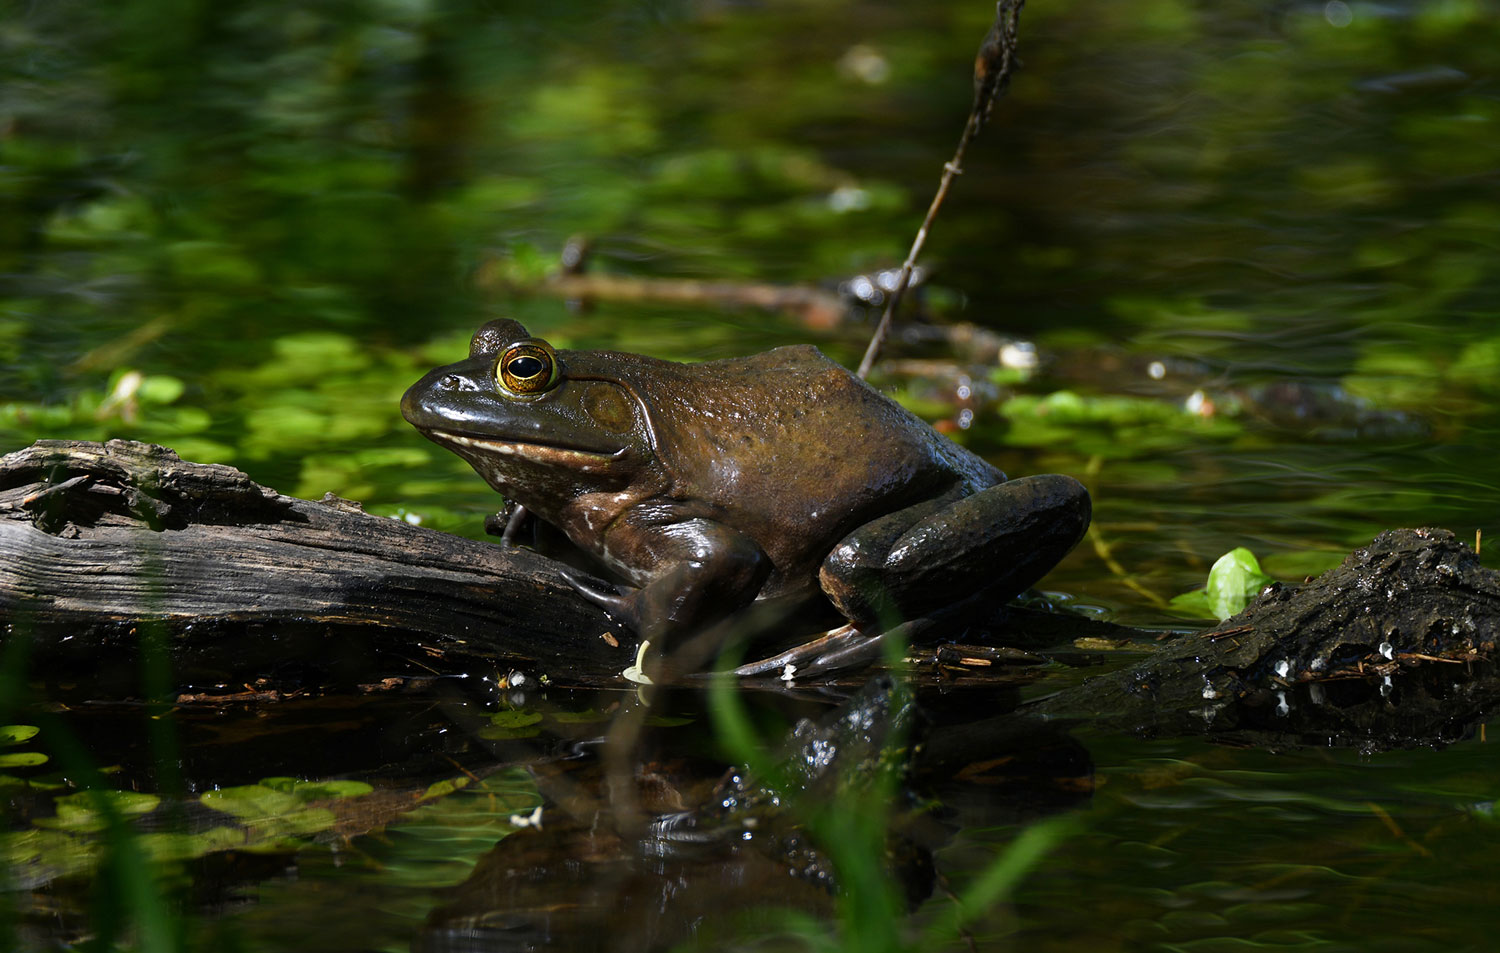 Myth buster: Frogs and toads don't cause warts